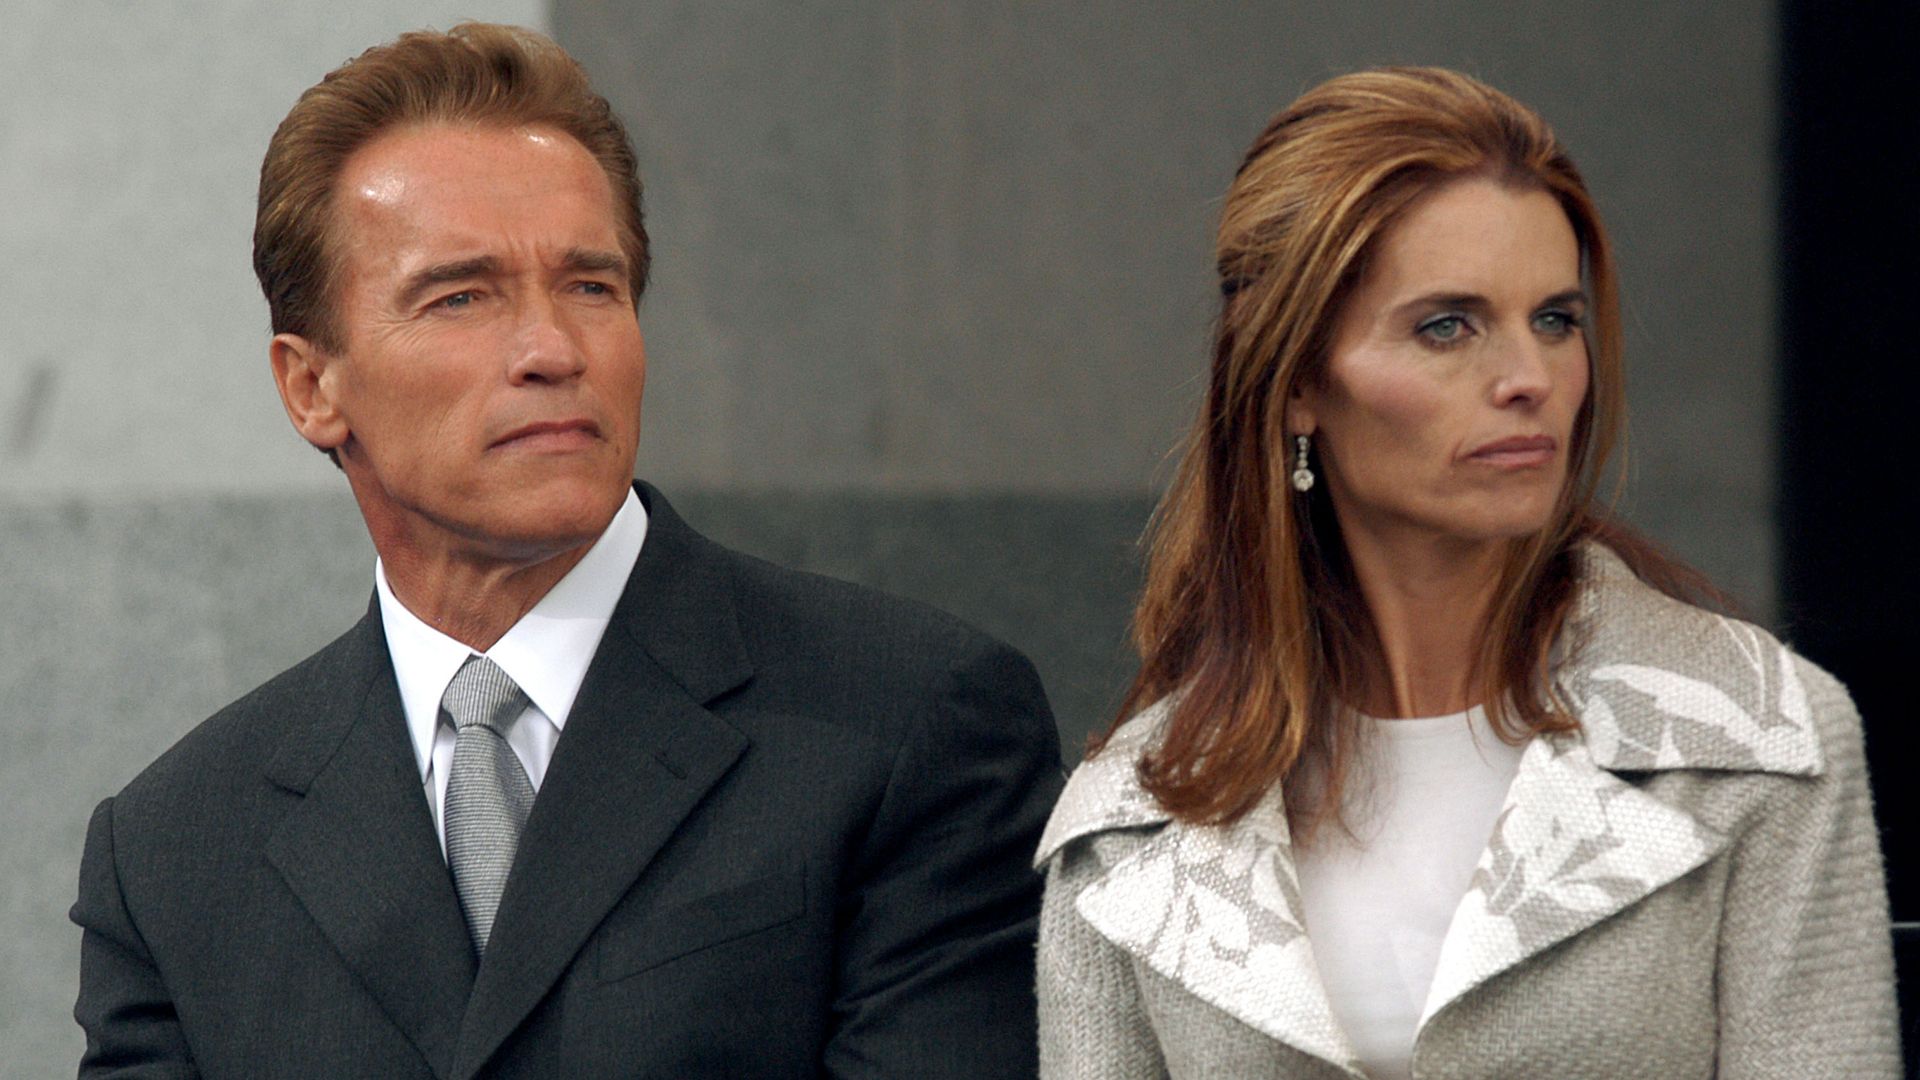 Arnold Schwarzenegger's biggest revelation about relationship with Maria Shriver confessed in new Netflix documentary